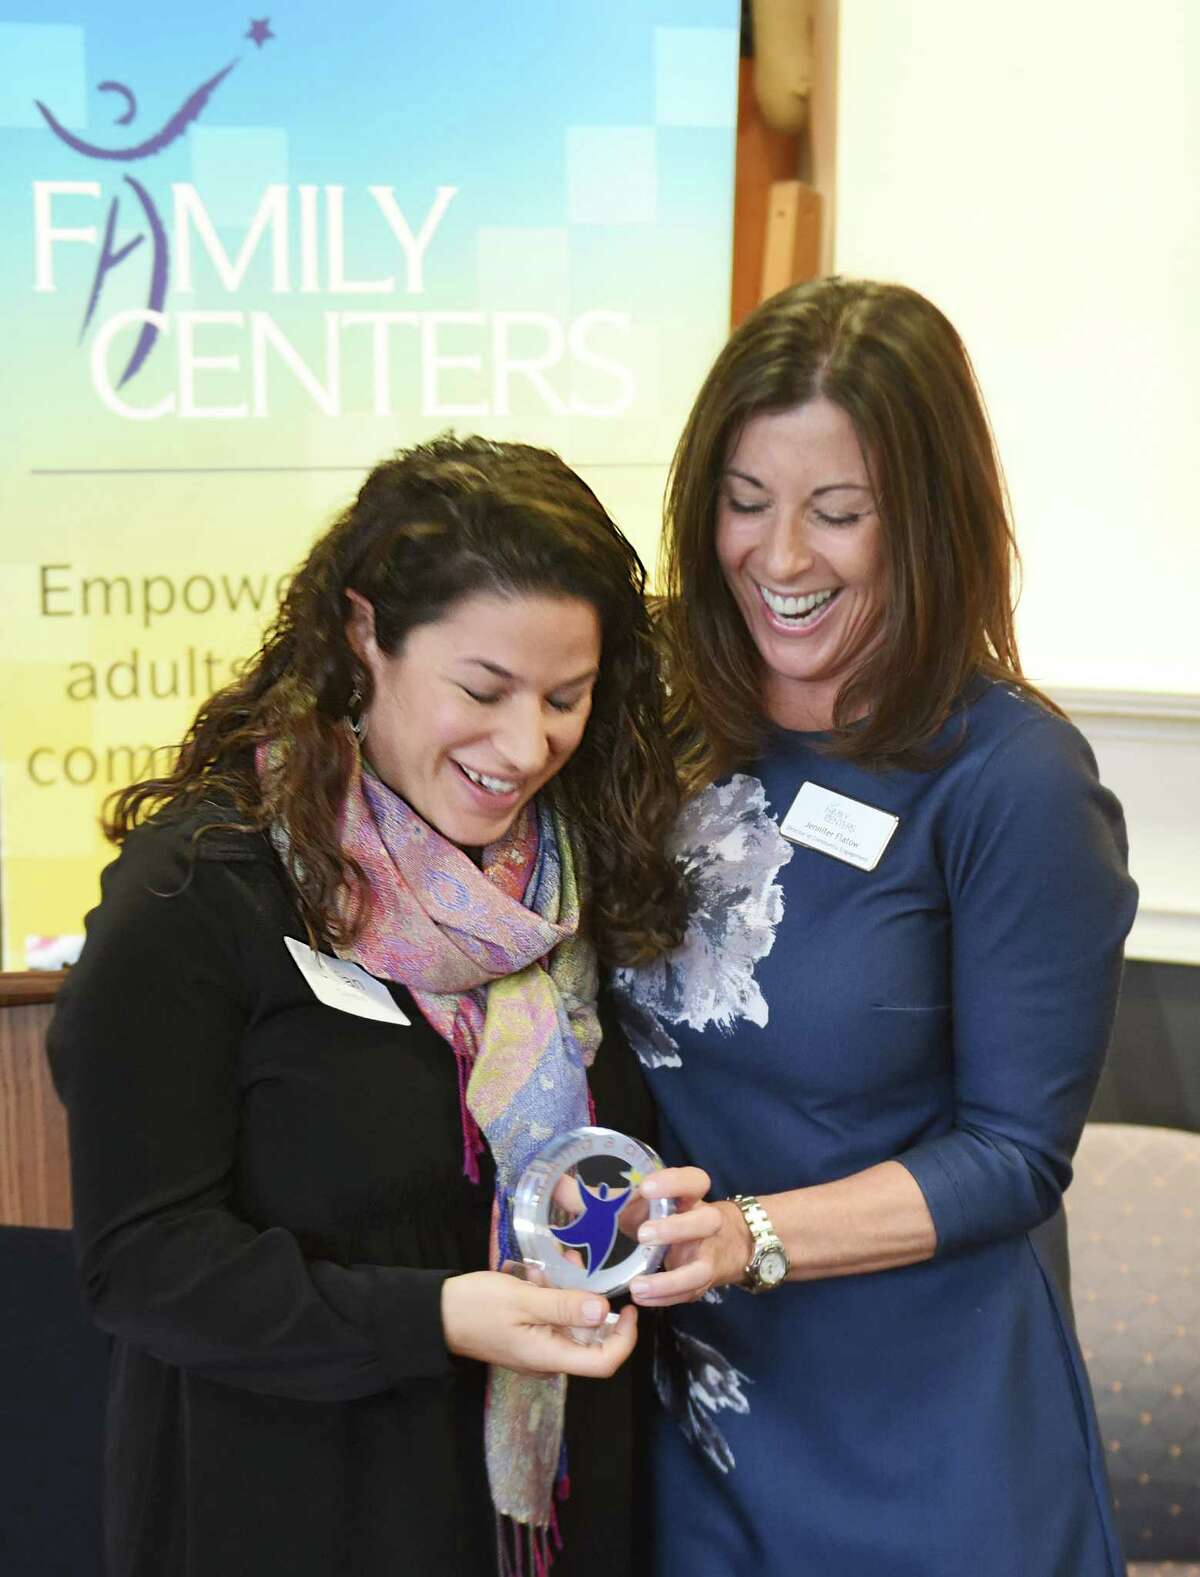 Associate Board Member Jillian Combis, left, accepts an award from Family Centers Director of Community Engagement Jennifer Flatow, right, at the Volunteer Recognition Breakfast at Family Centers in Greenwich, Conn. Thursday, April 7, 2016. In honor of National Volunteer Week, awards volunteer service were presented to employees from Mothers for Others, Morgan Stanley Wealth Management, Greenwich Avenue Apple Store and Family Centers' Board of Directors. Family Centers is a nonprofit organization providing education and services to children, adults and families in Fairfield County through a team of more than 200 employees and 3,000 trained volunteers.